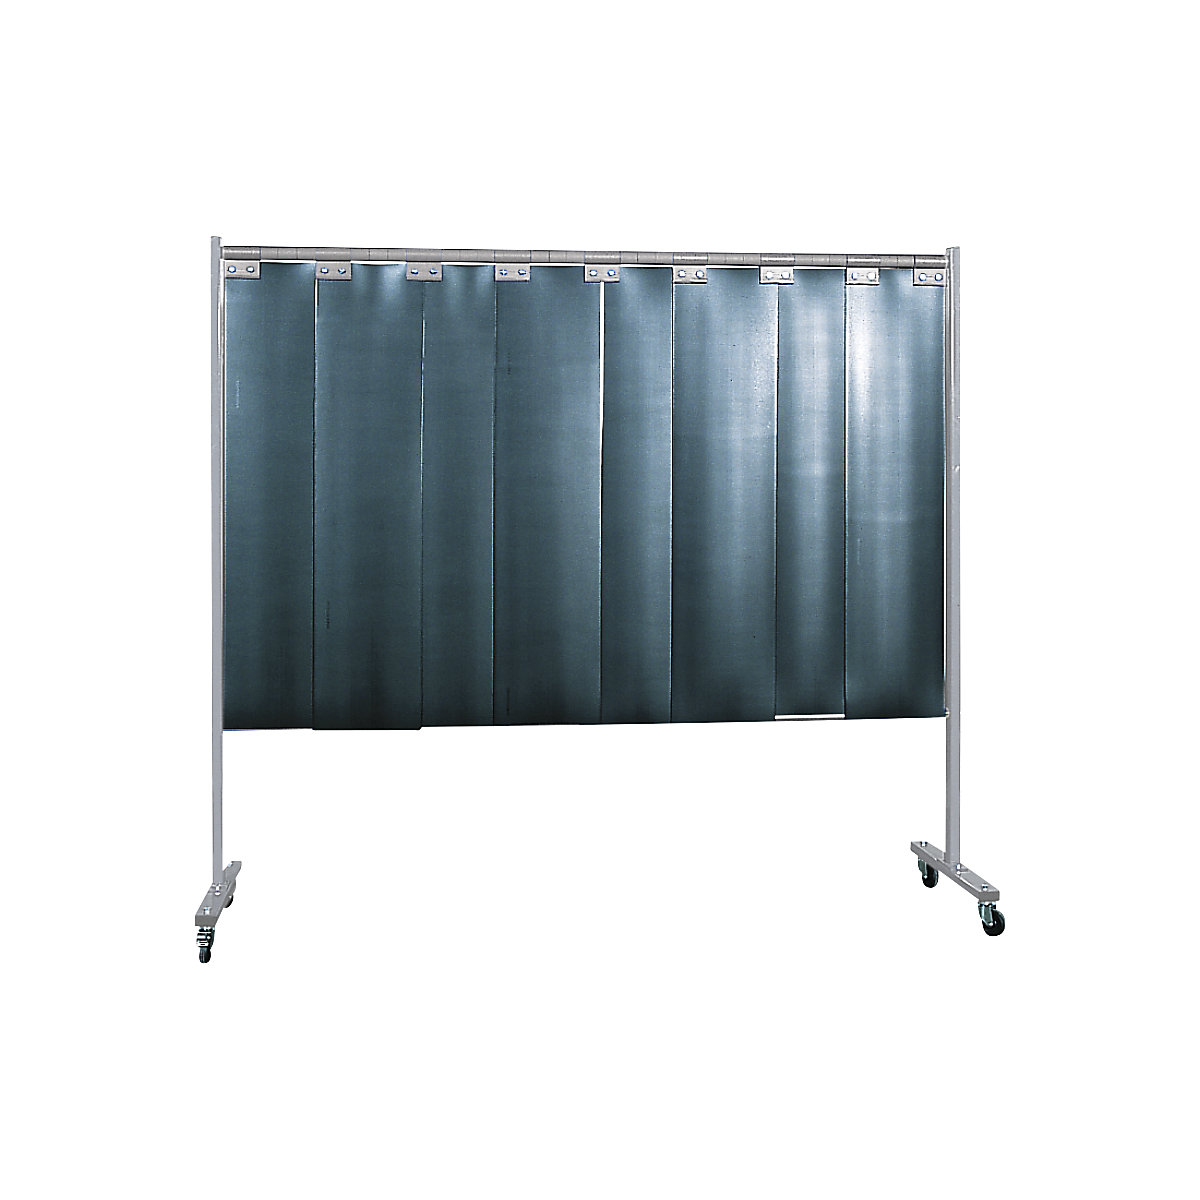 Mobile welding protection screen, single unit design, HxW 1900 x 2100 mm, with lamellar curtain, dark green